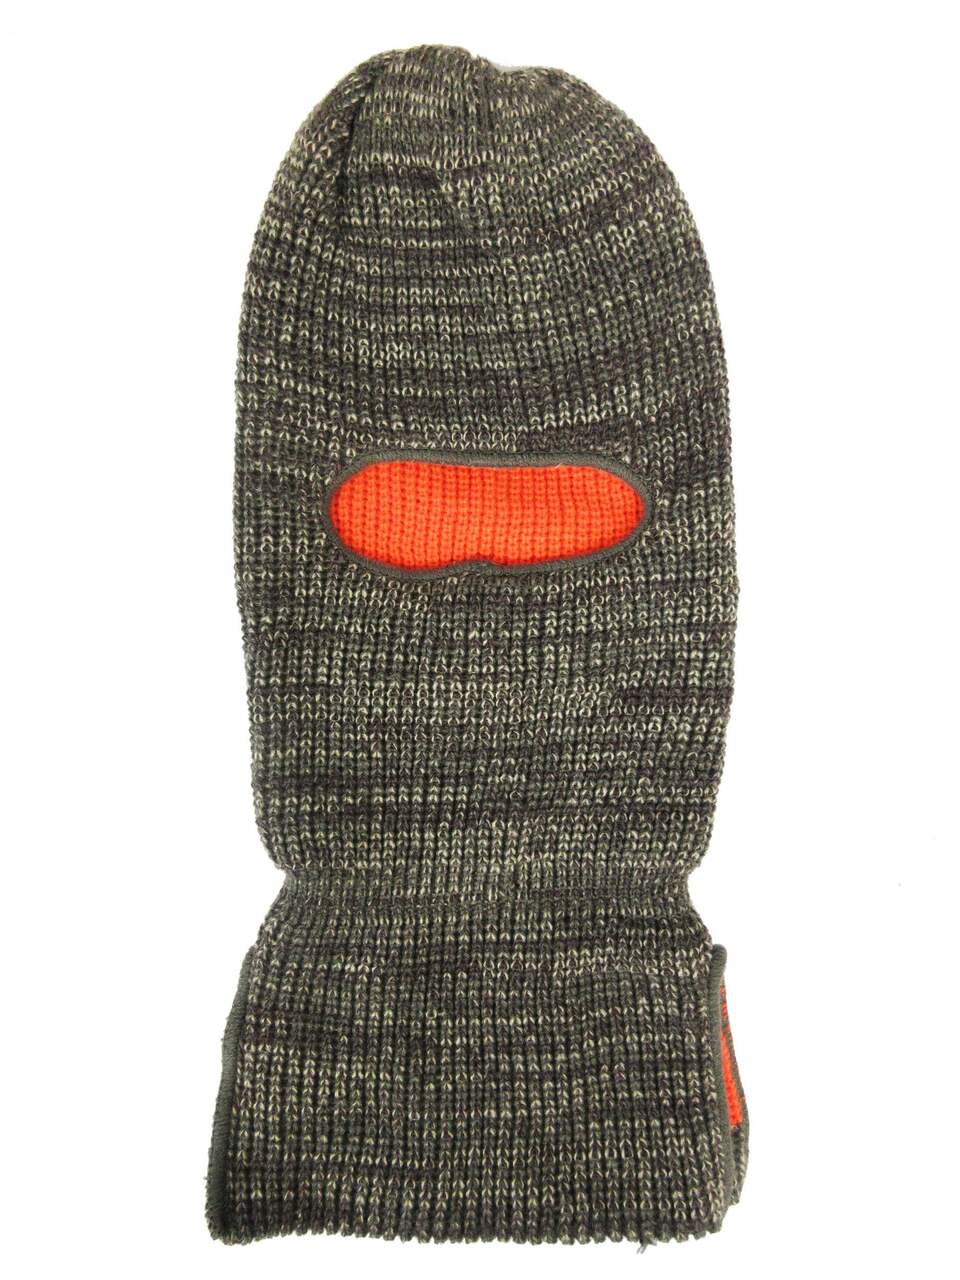 Reversible Knit Balaclava Hat with Face Mask for Hunting, One Size, Camo/Blaze  Orange